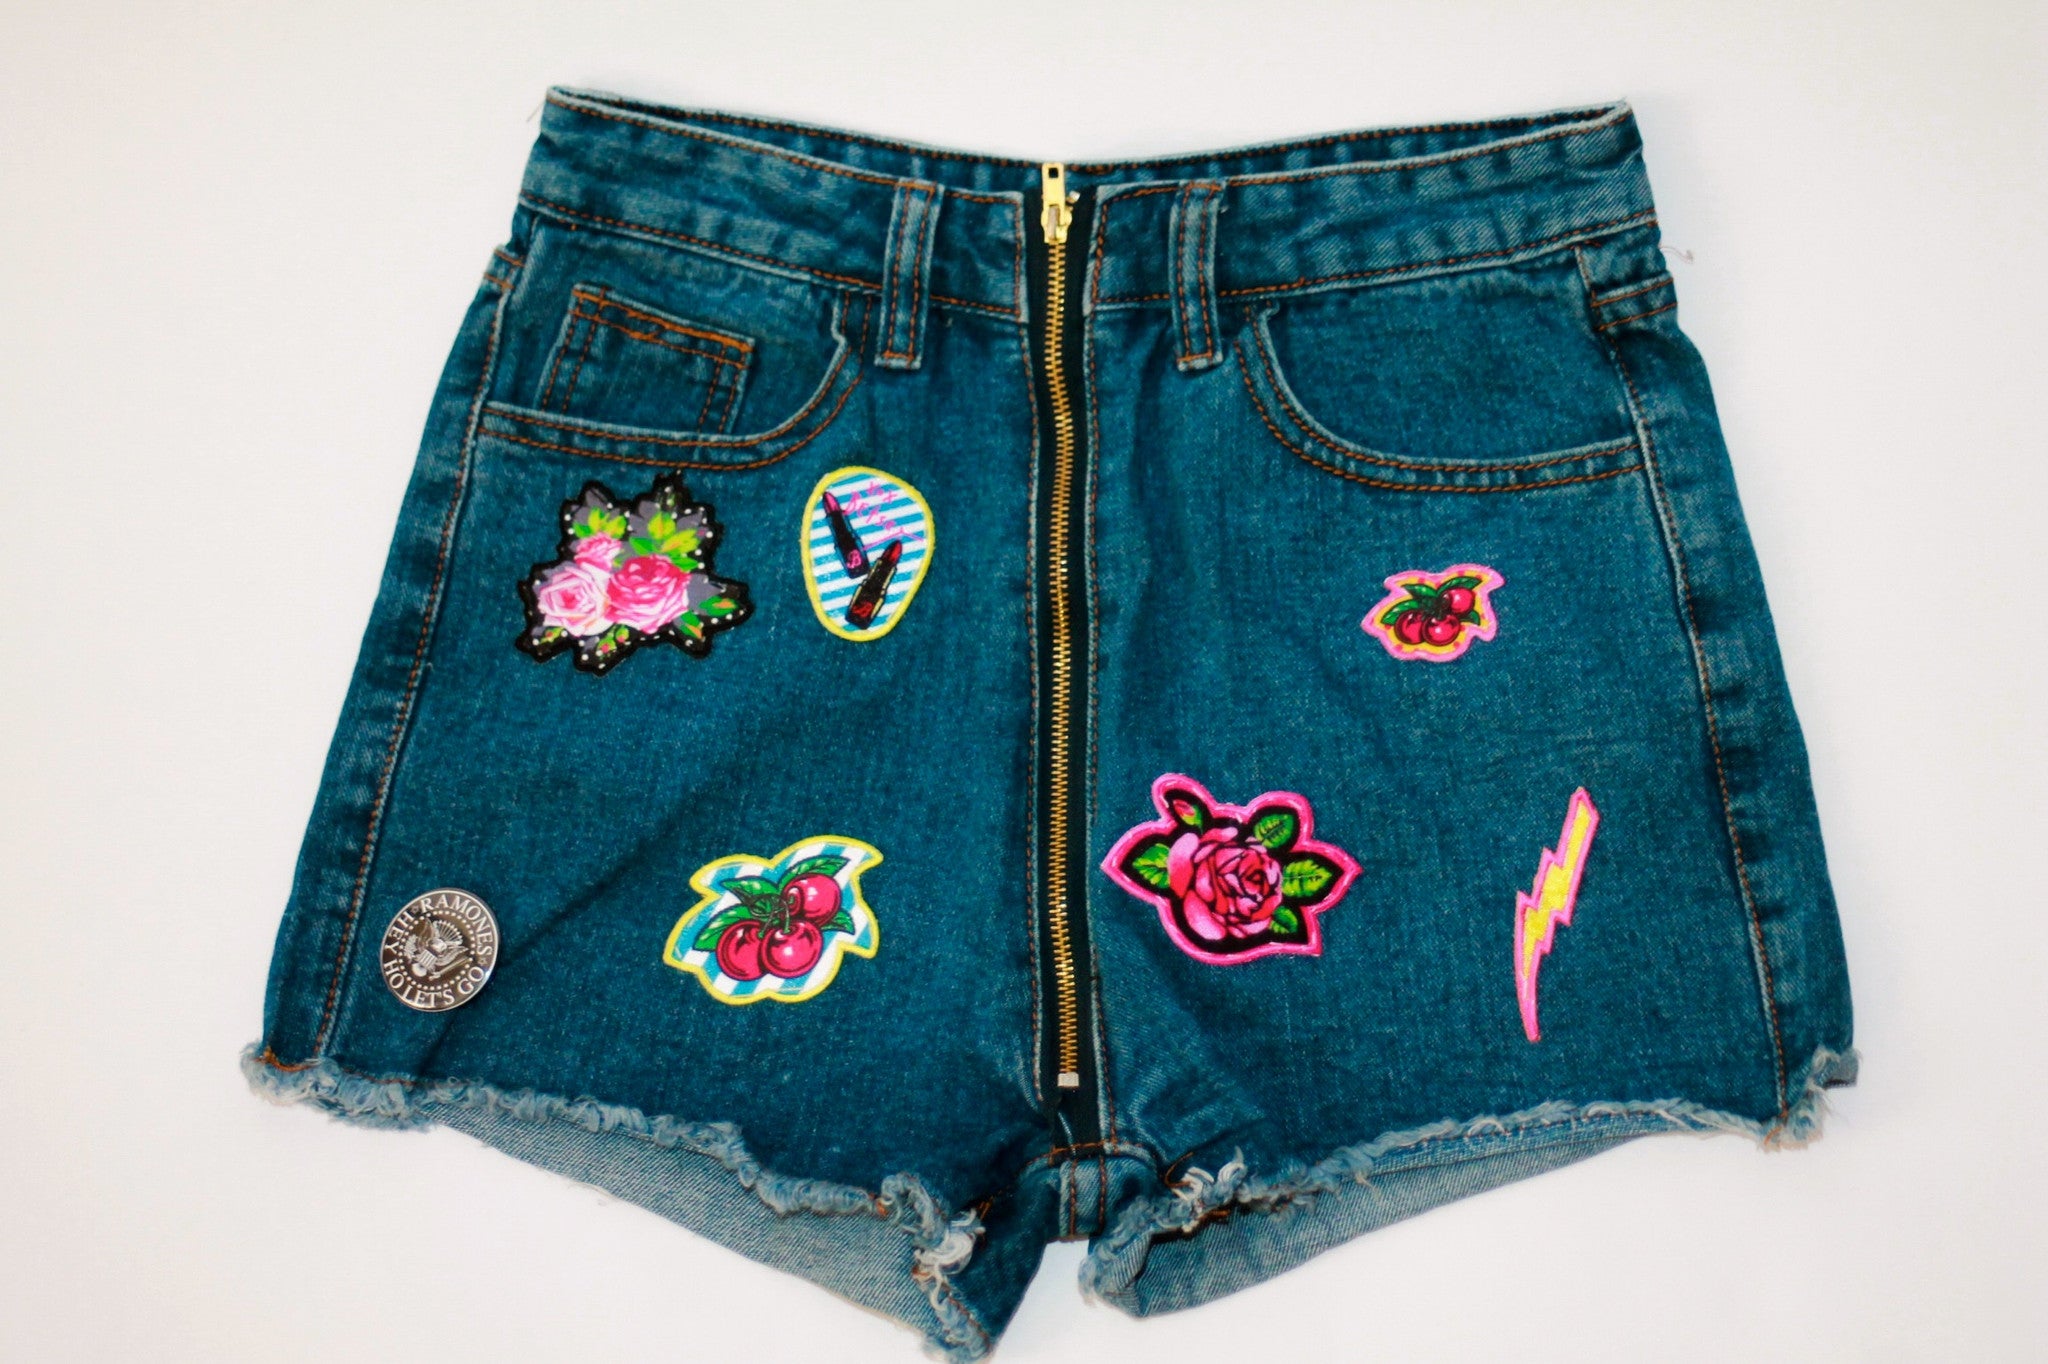 Custom 7ven x Betsey Johnson Patched Shorts #5